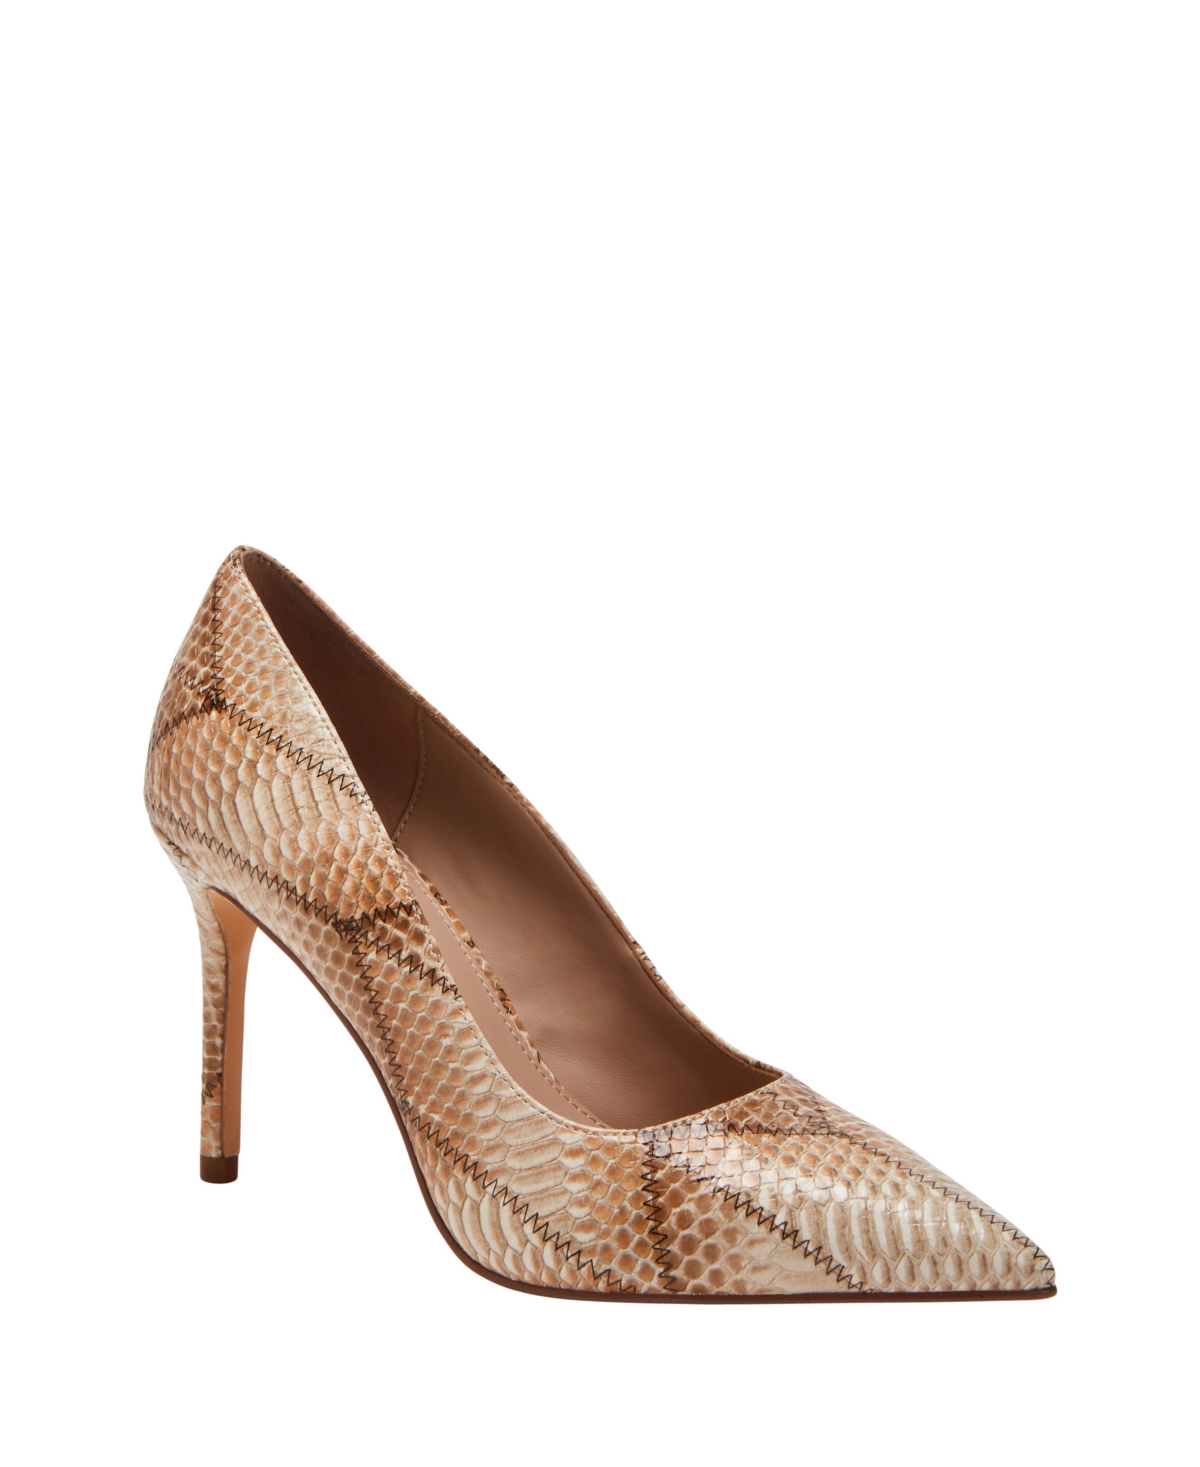 Katy Perry Women's Revival Pointed Toe Pumps In Tan Multi